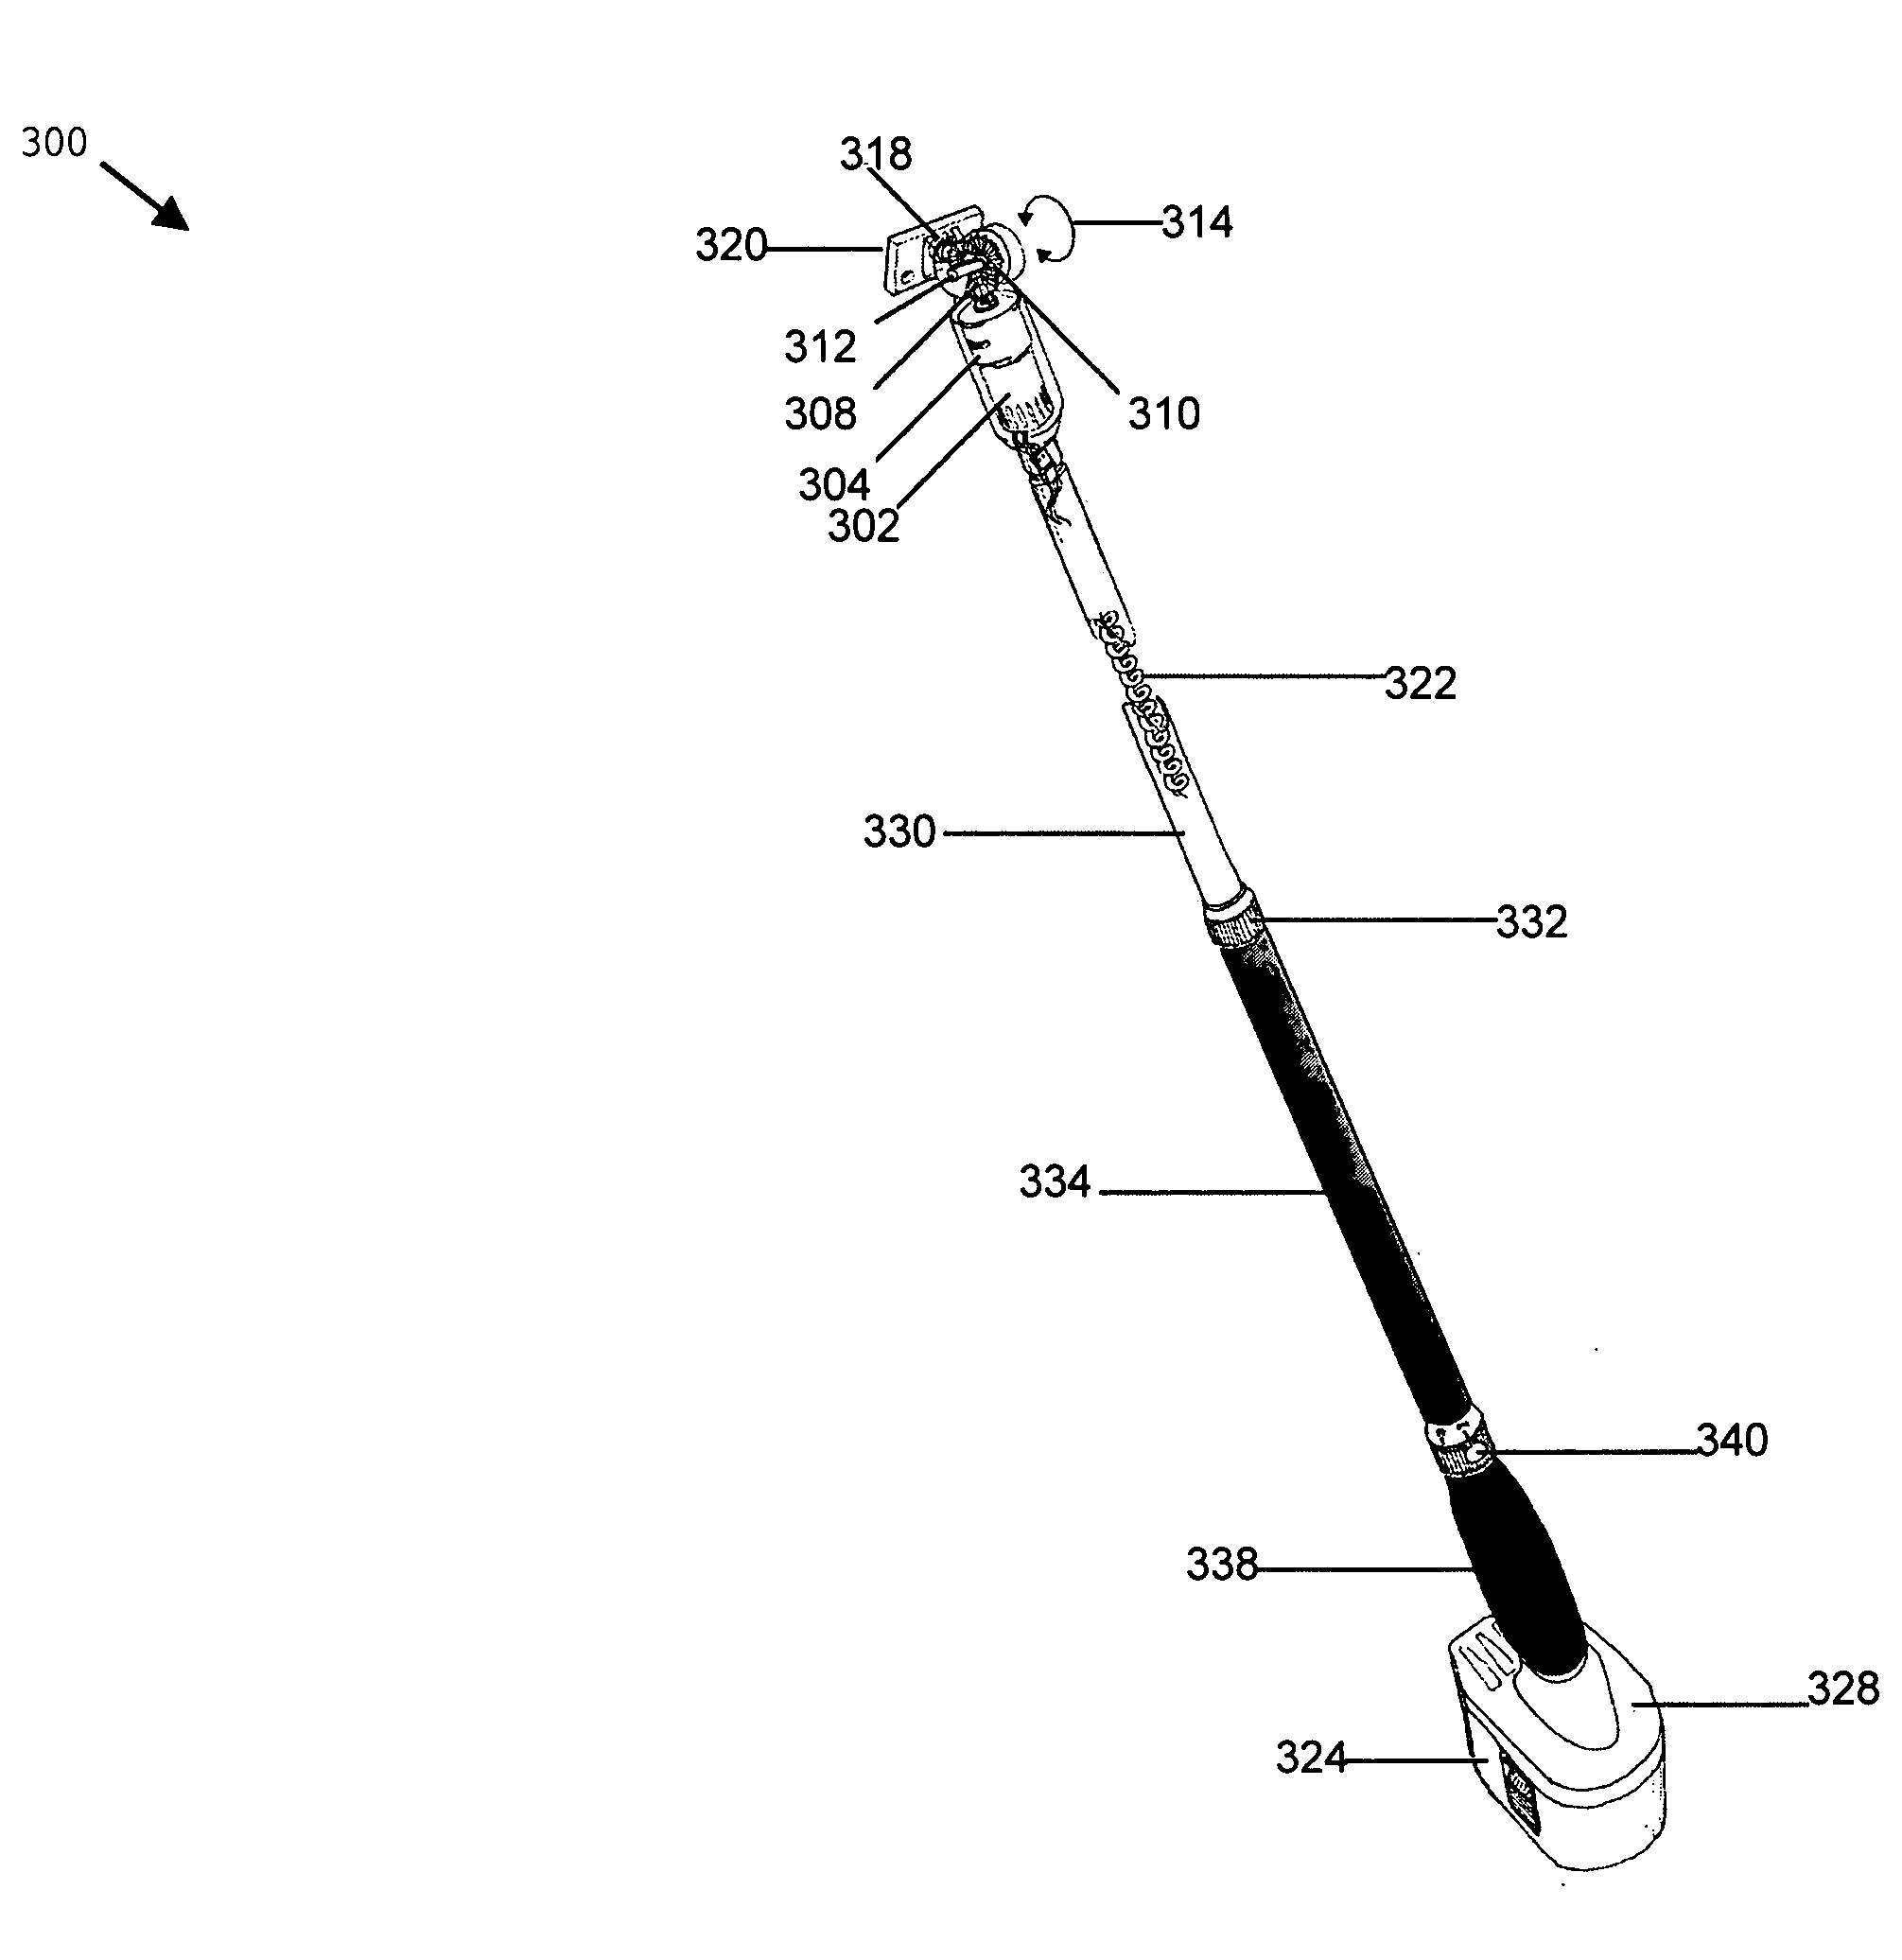 Systems and methods of a power tool system with interchangeable functional attachments